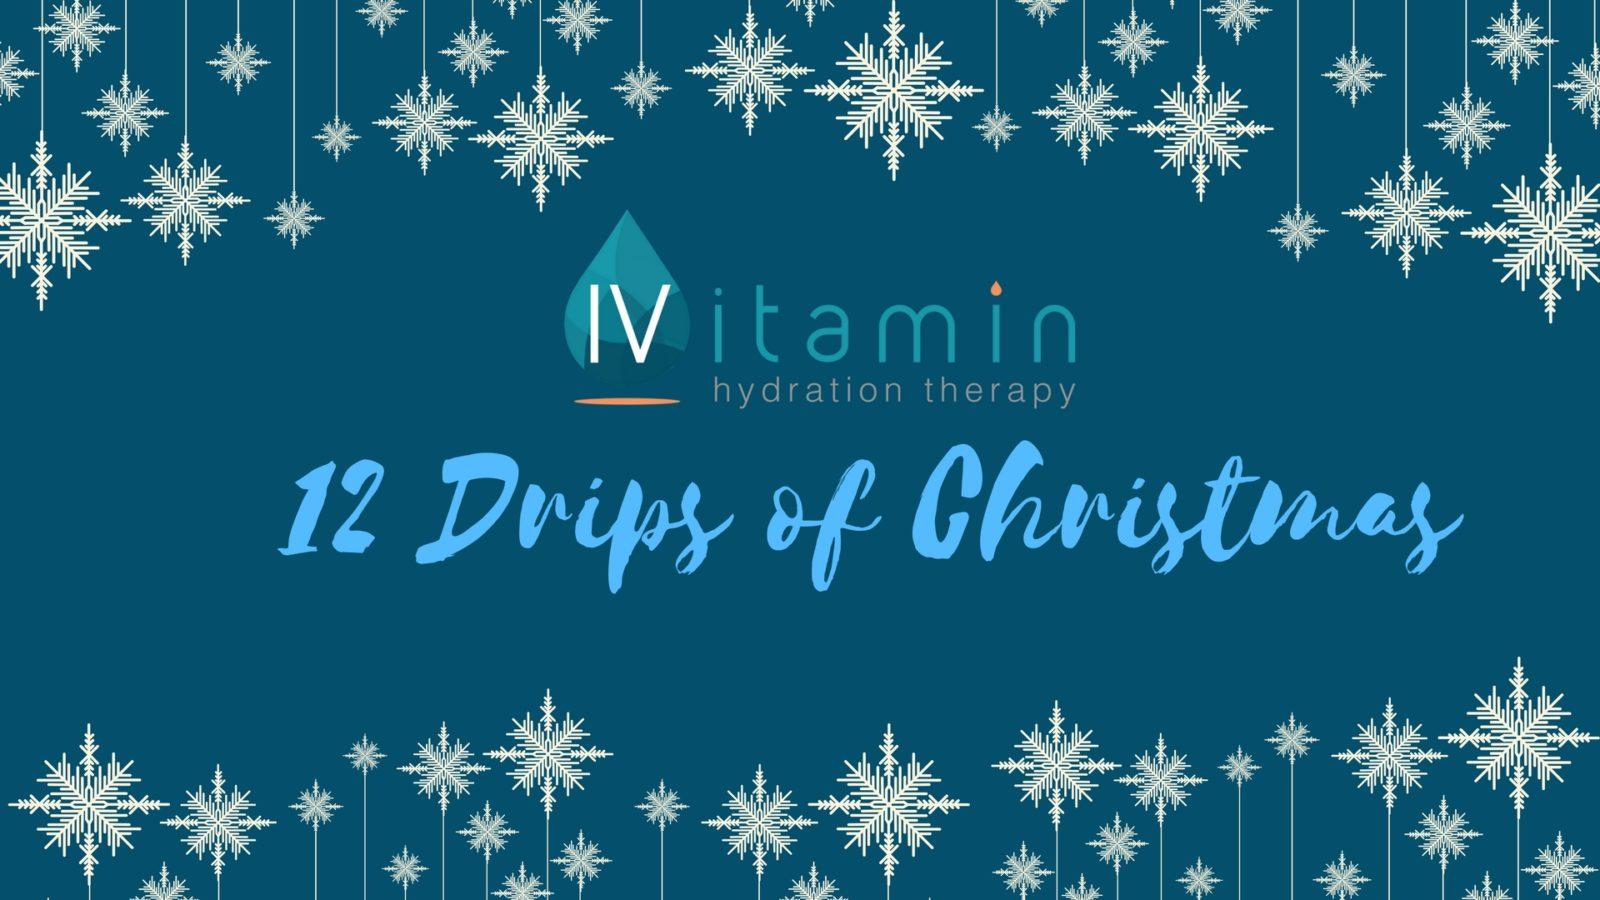 12 Drips of Christmas - Special Holiday Deals! - IVitamin